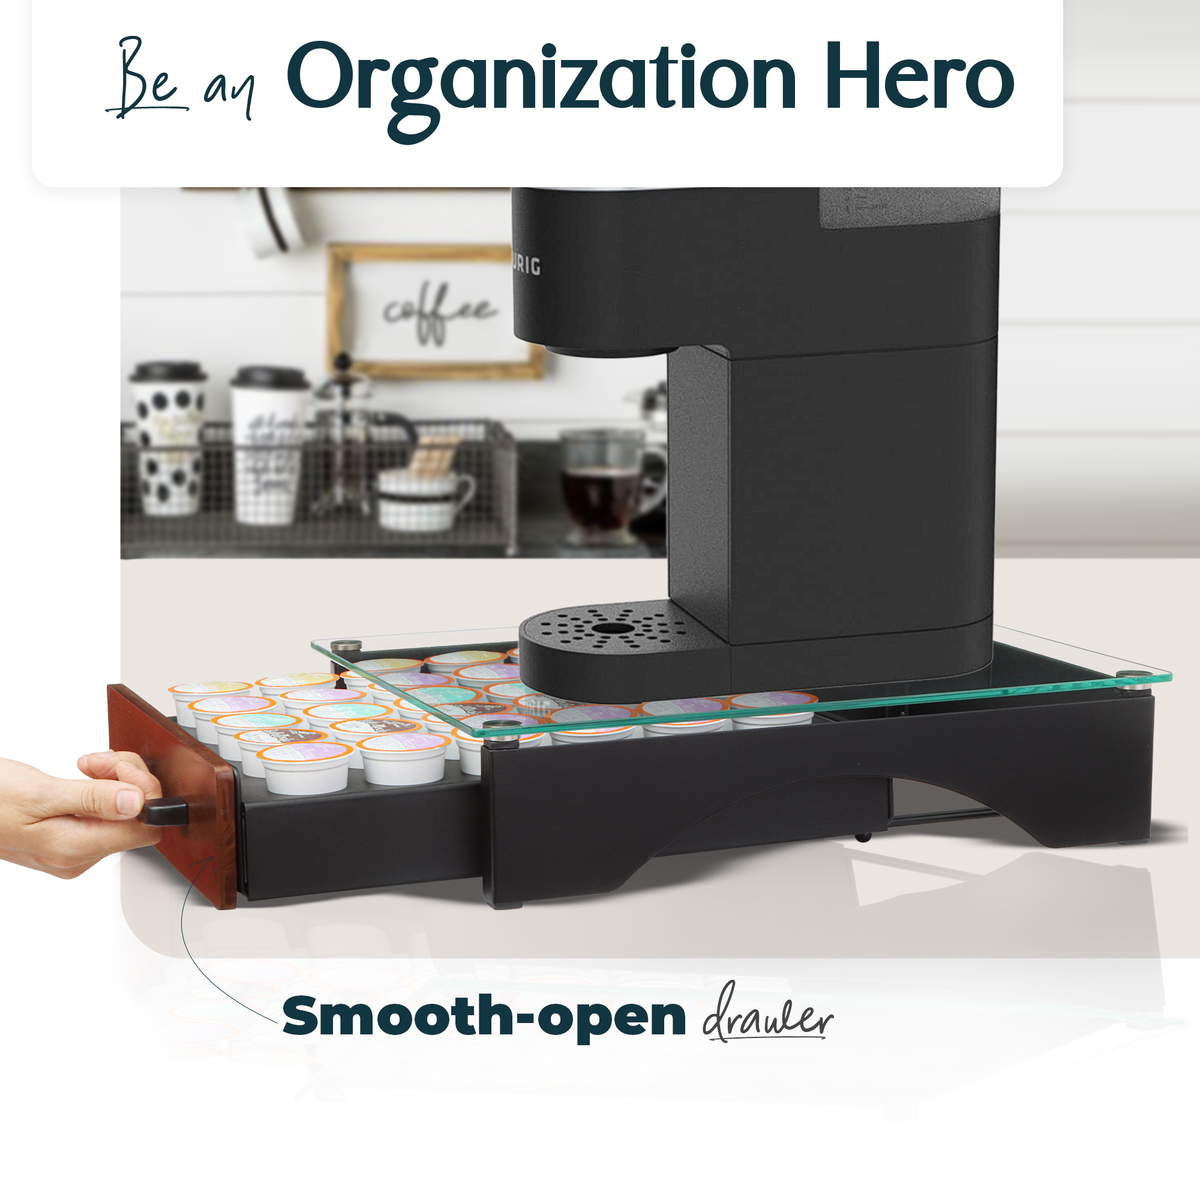 Smooth-open drawer feature of the K Cup Organizer that is featured on a counter top with coffee cups at the background